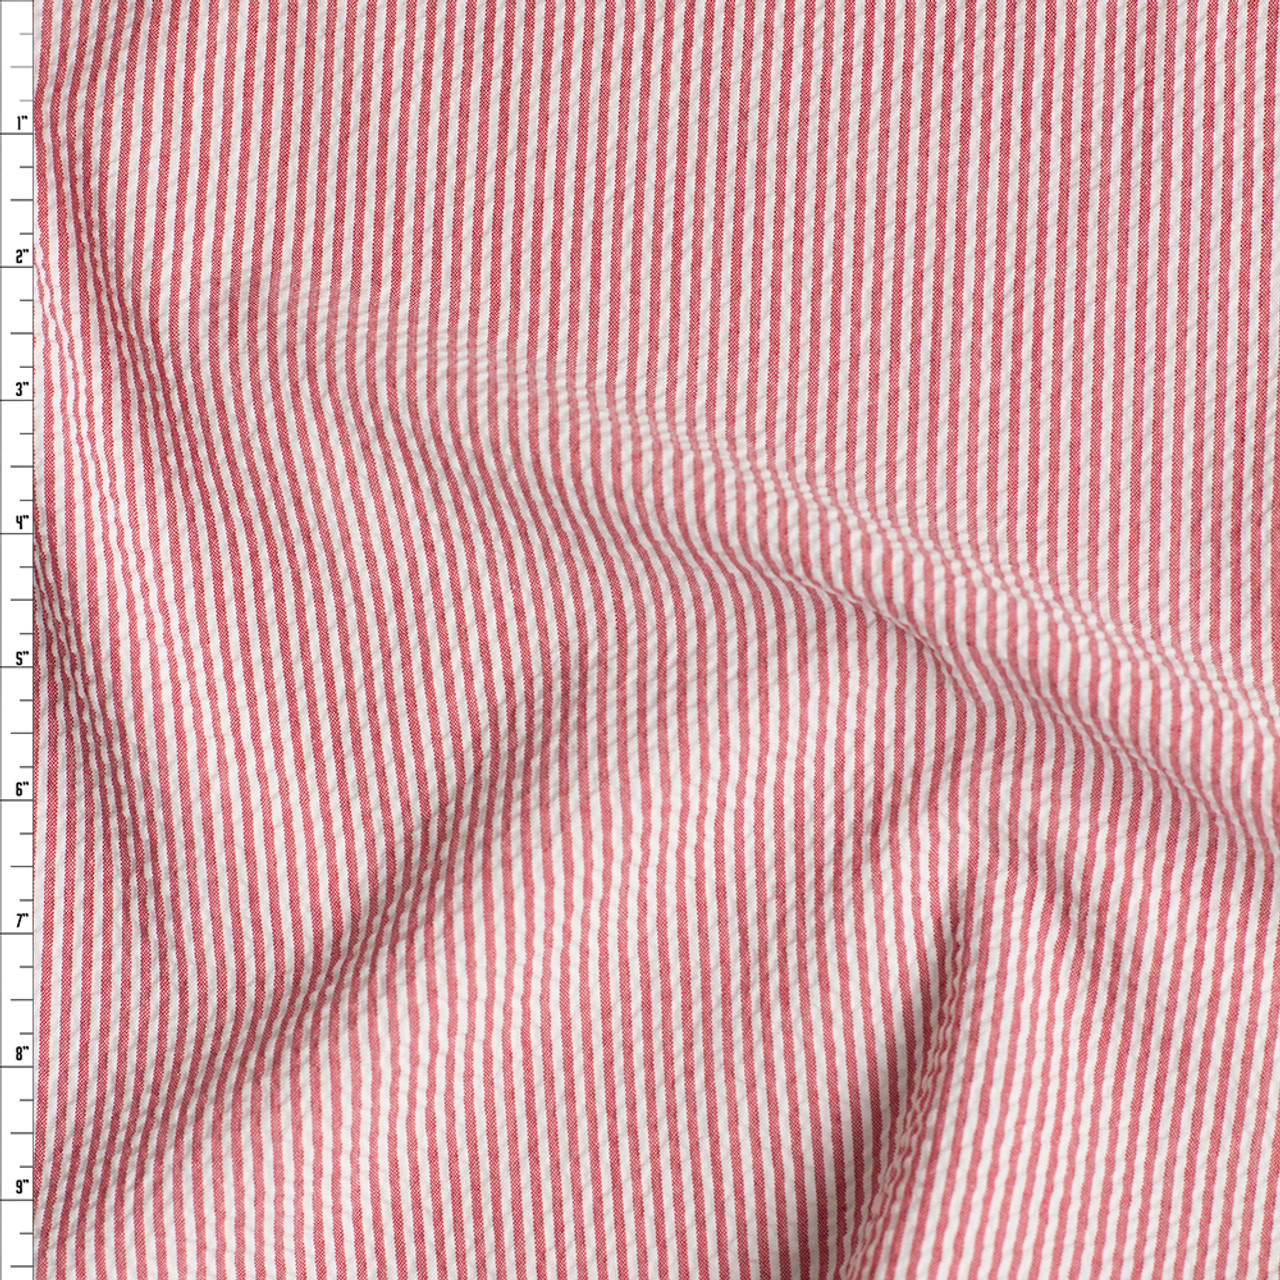 Cali Fabrics Red and White Vertical Stripe Seersucker Fabric by the Yard